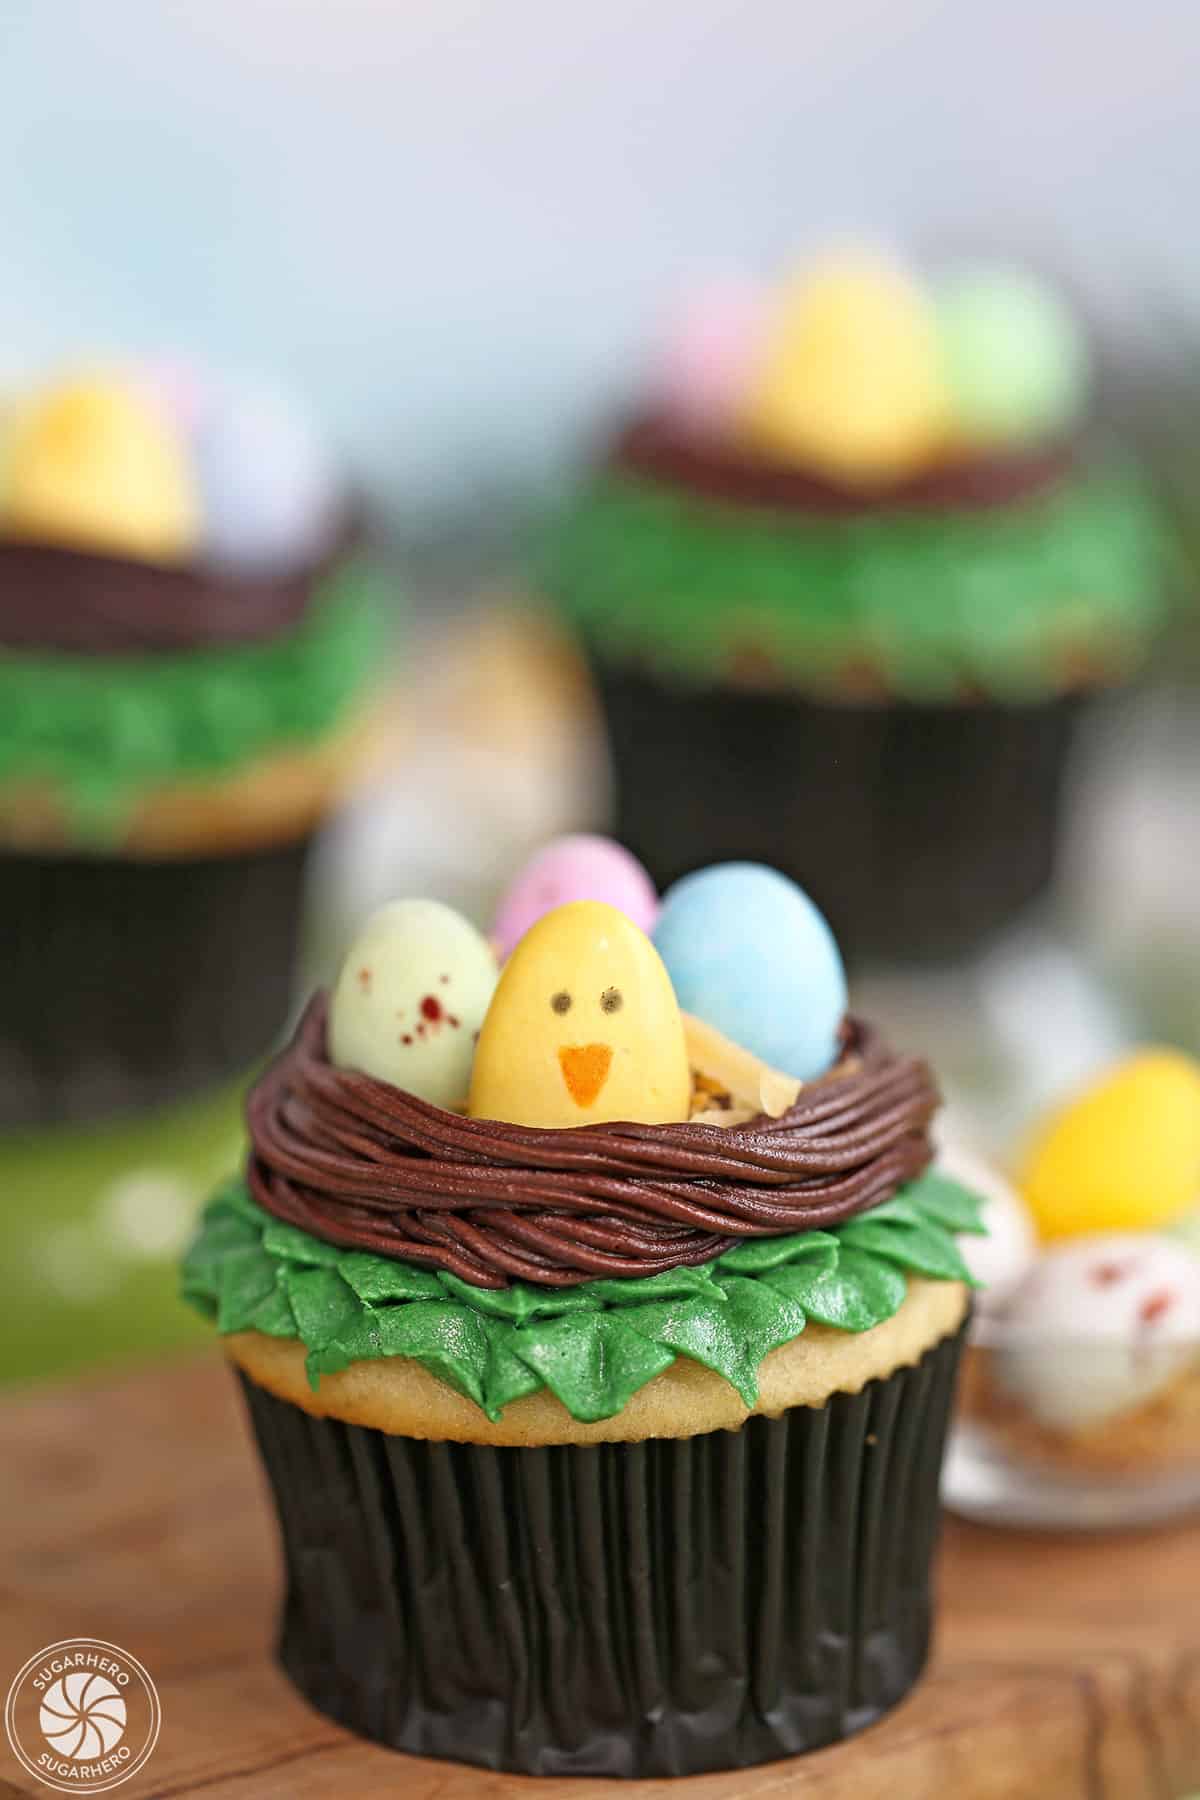 Three Easter Bird's Nest Cupcakes with chocolate eggs in the nest.